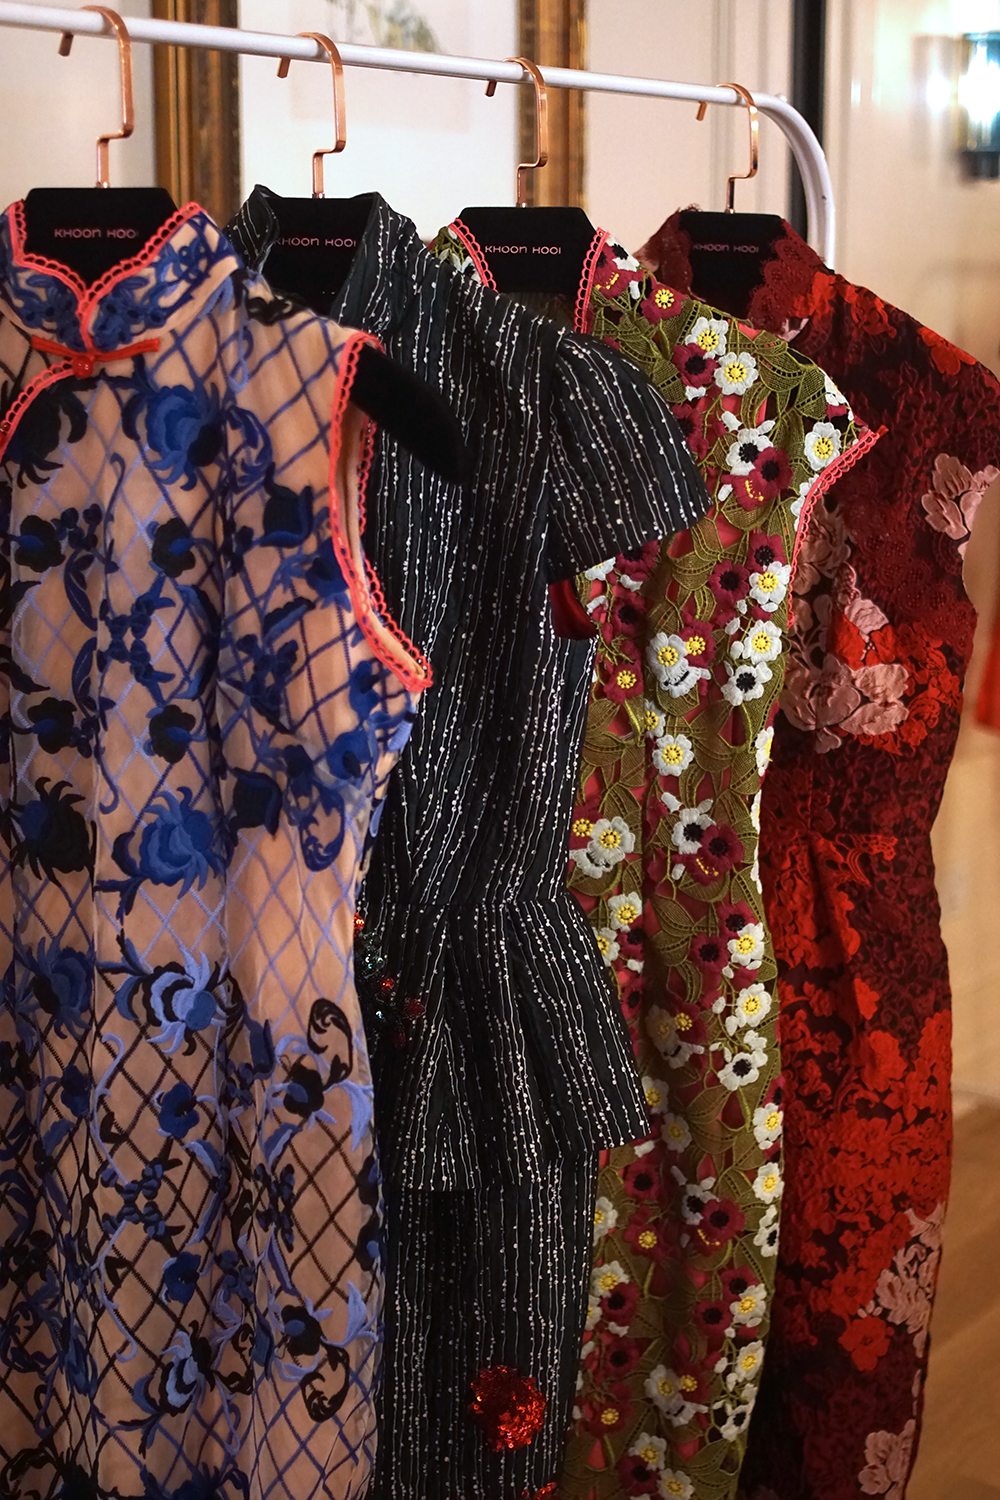 Connecting the threads of the qipao: An evolution of the iconic Chinese ...